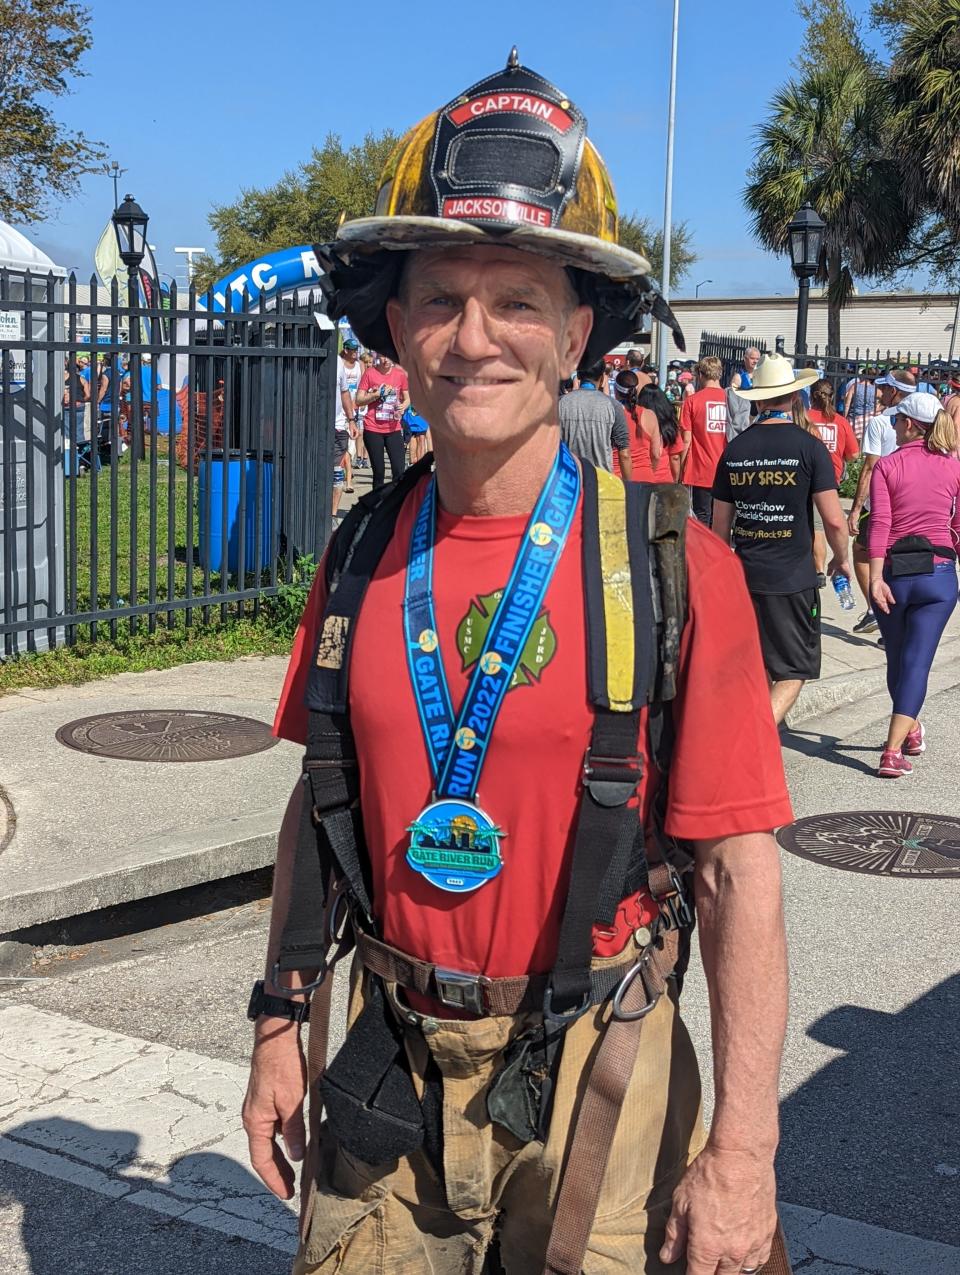 Capt. Eric Prosswimmer of the Jacksonville Fire and Rescue Department completed the Gate River Run in full firefighting gear on March 5, 2022. [Clayton Freeman/Florida Times-Union]